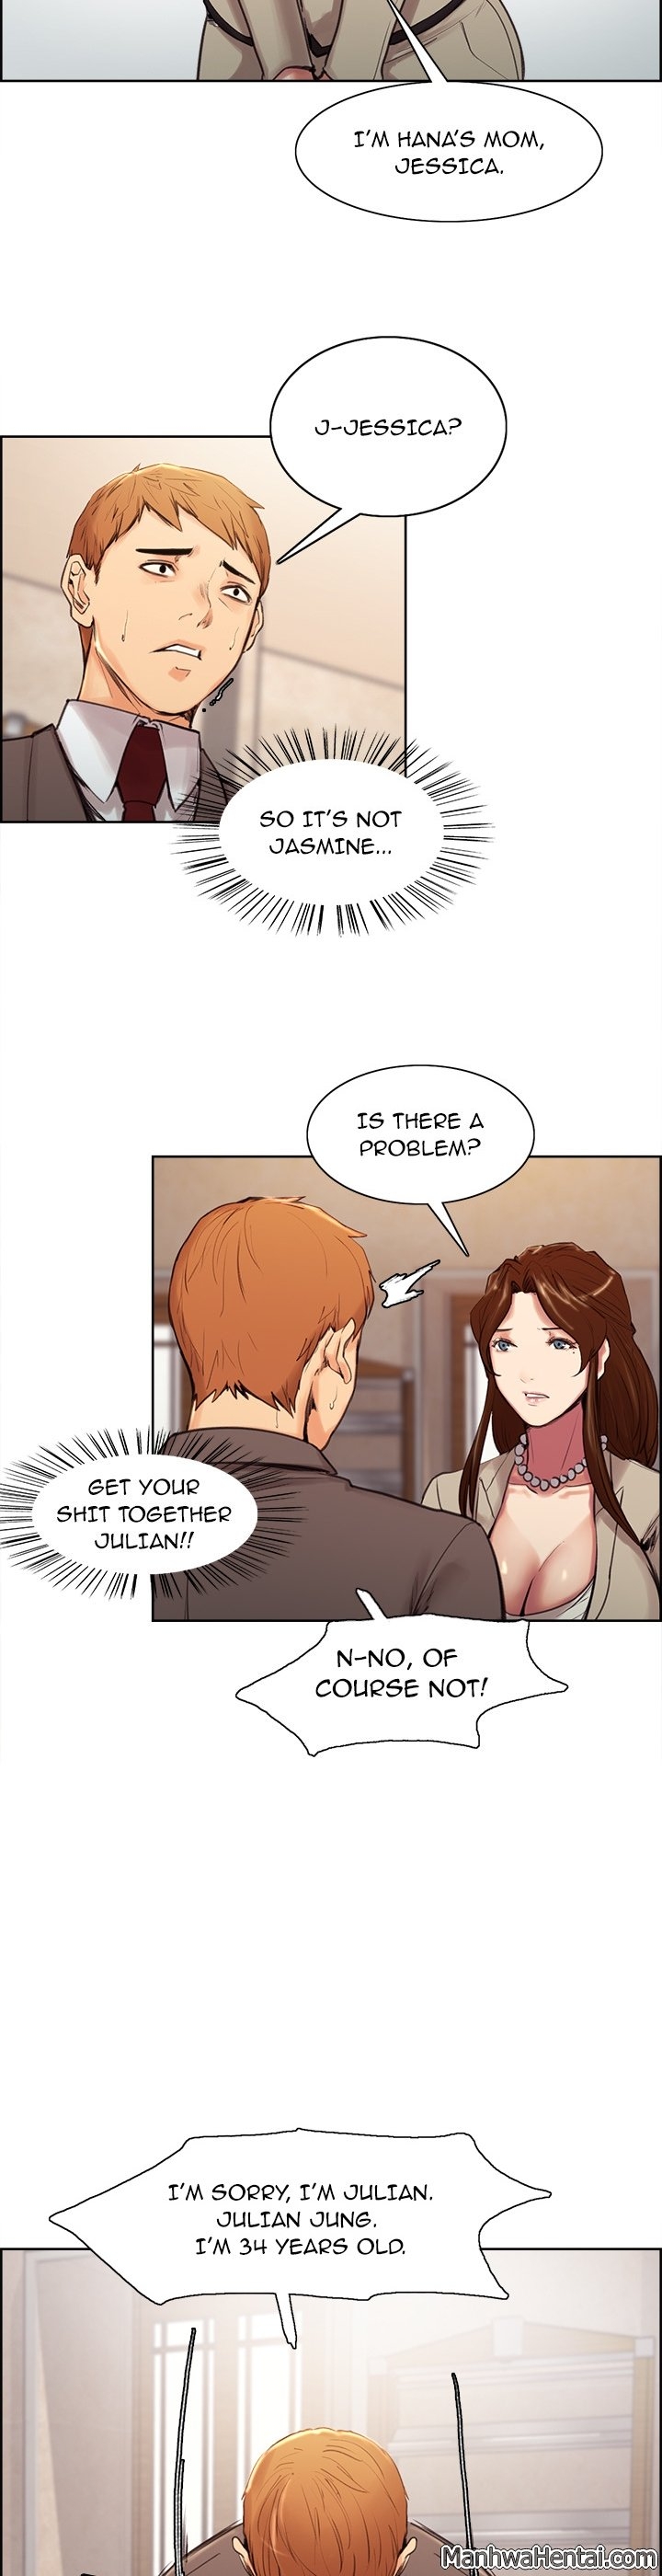 [Serious] The Sharehouse Ch. 1-11 [English] 99